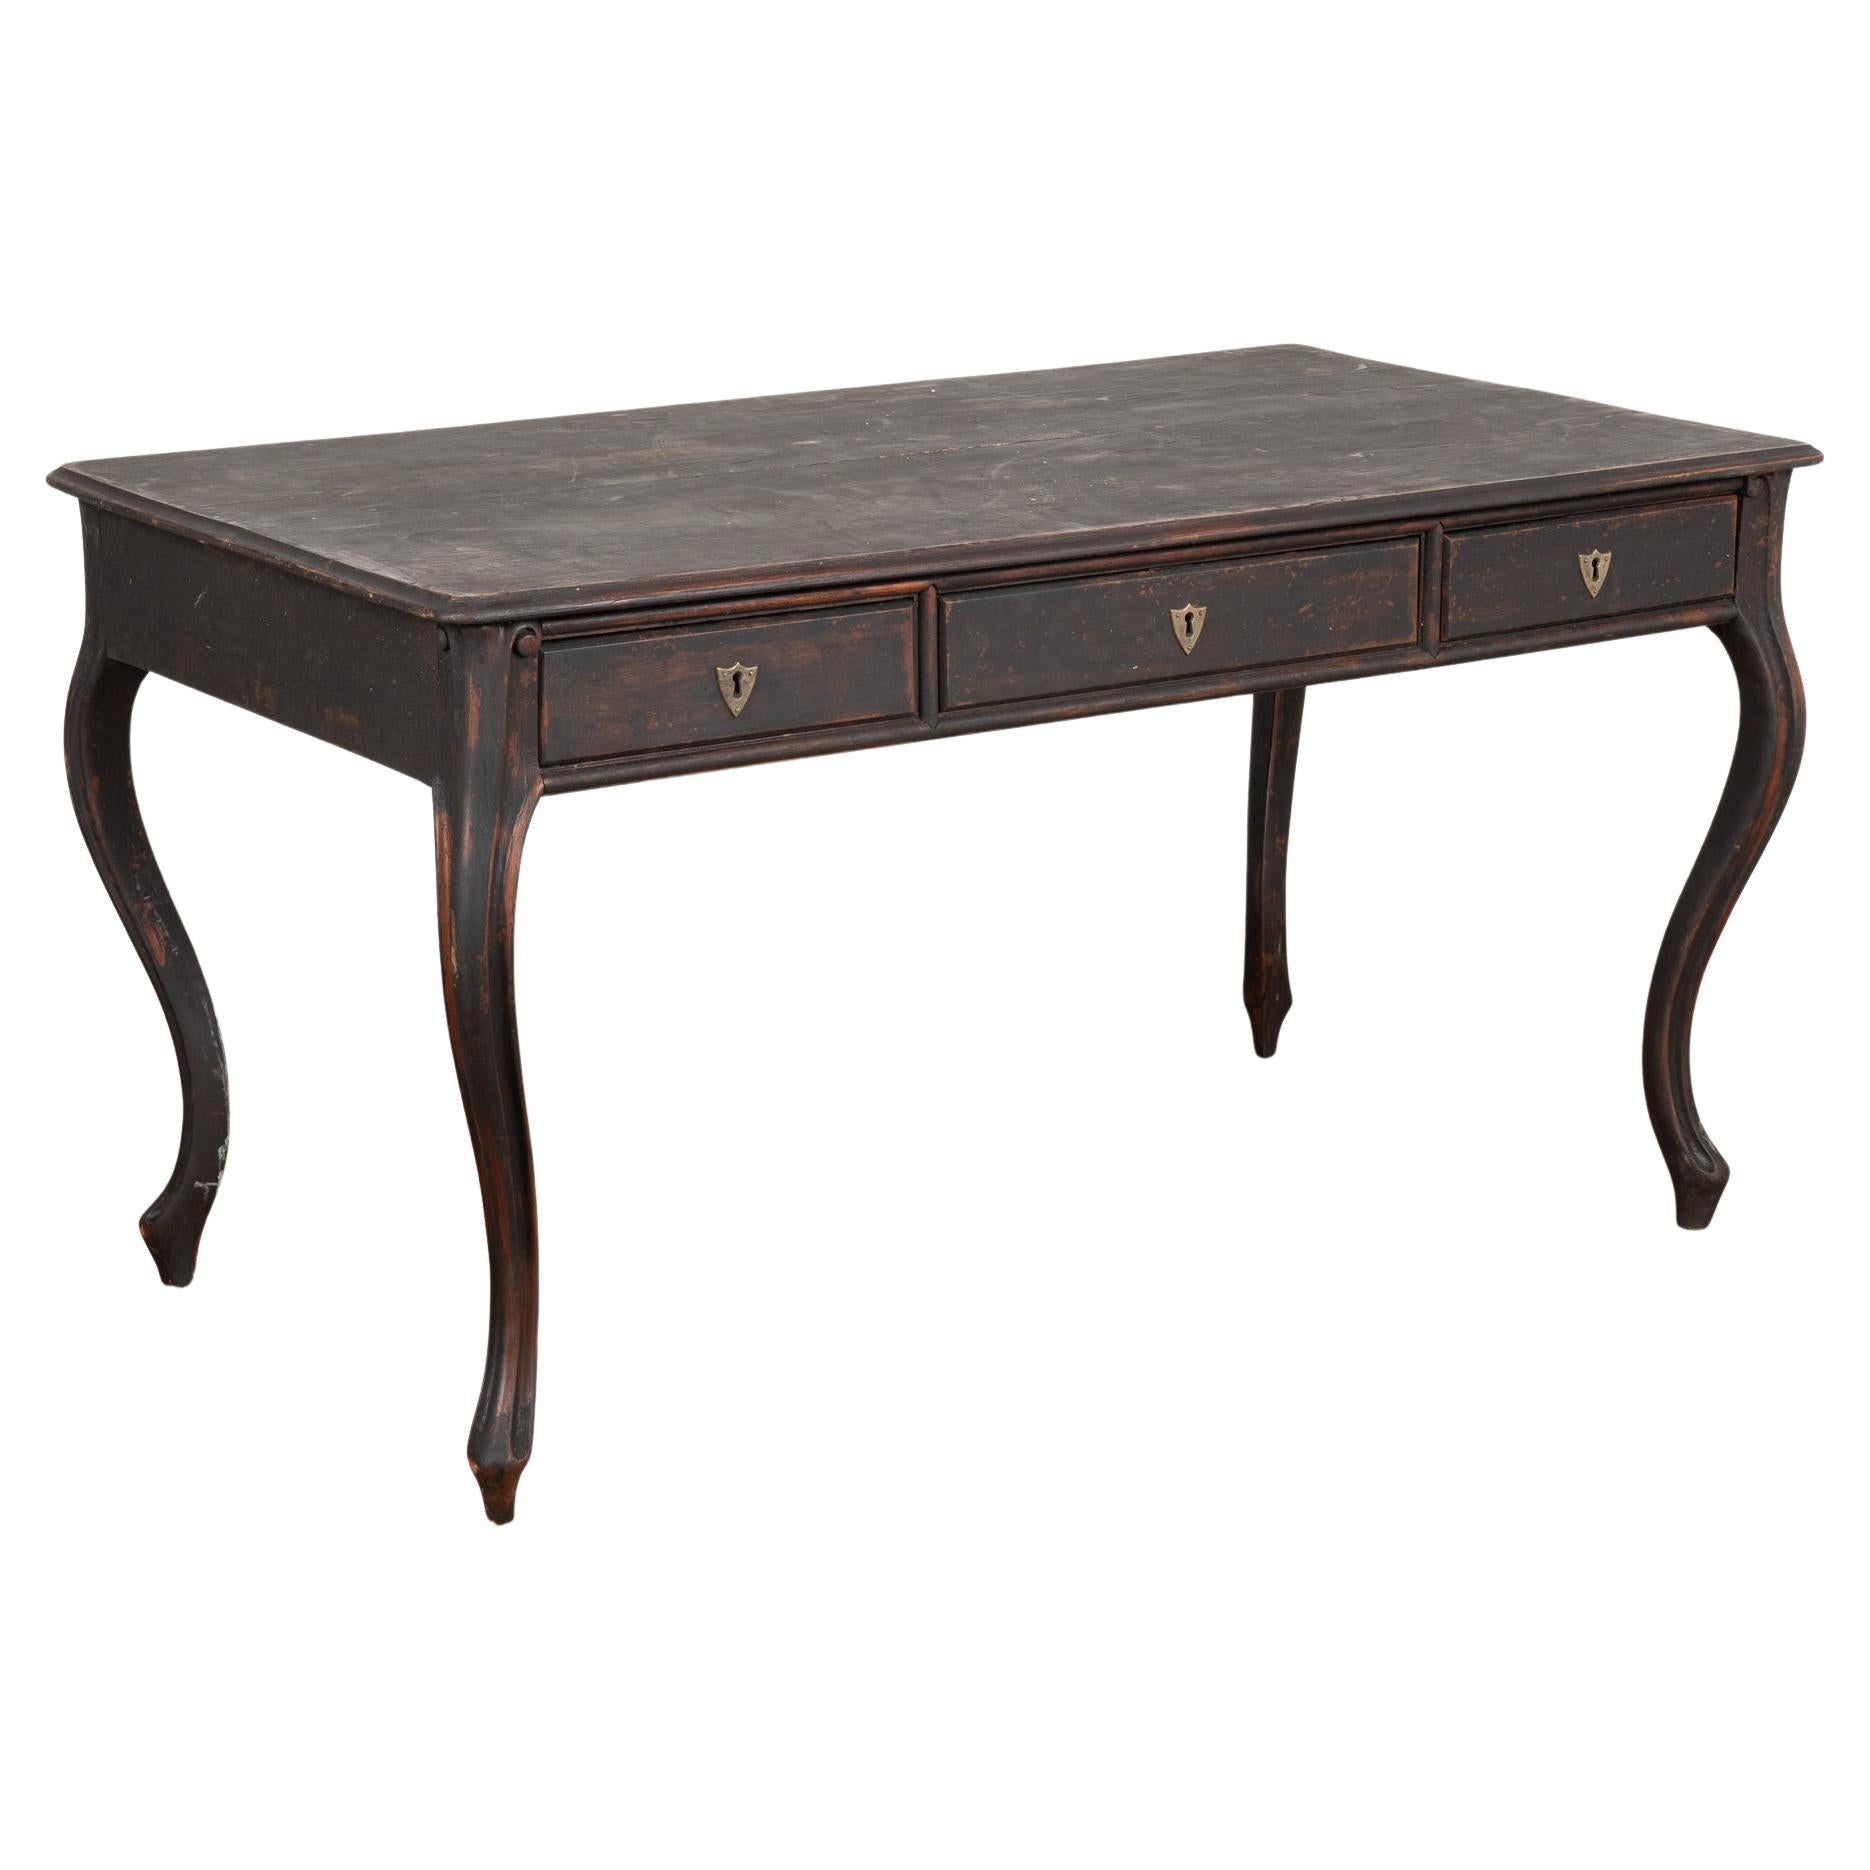 Black Writing Table Desk With Three Drawers, Sweden circa 1900